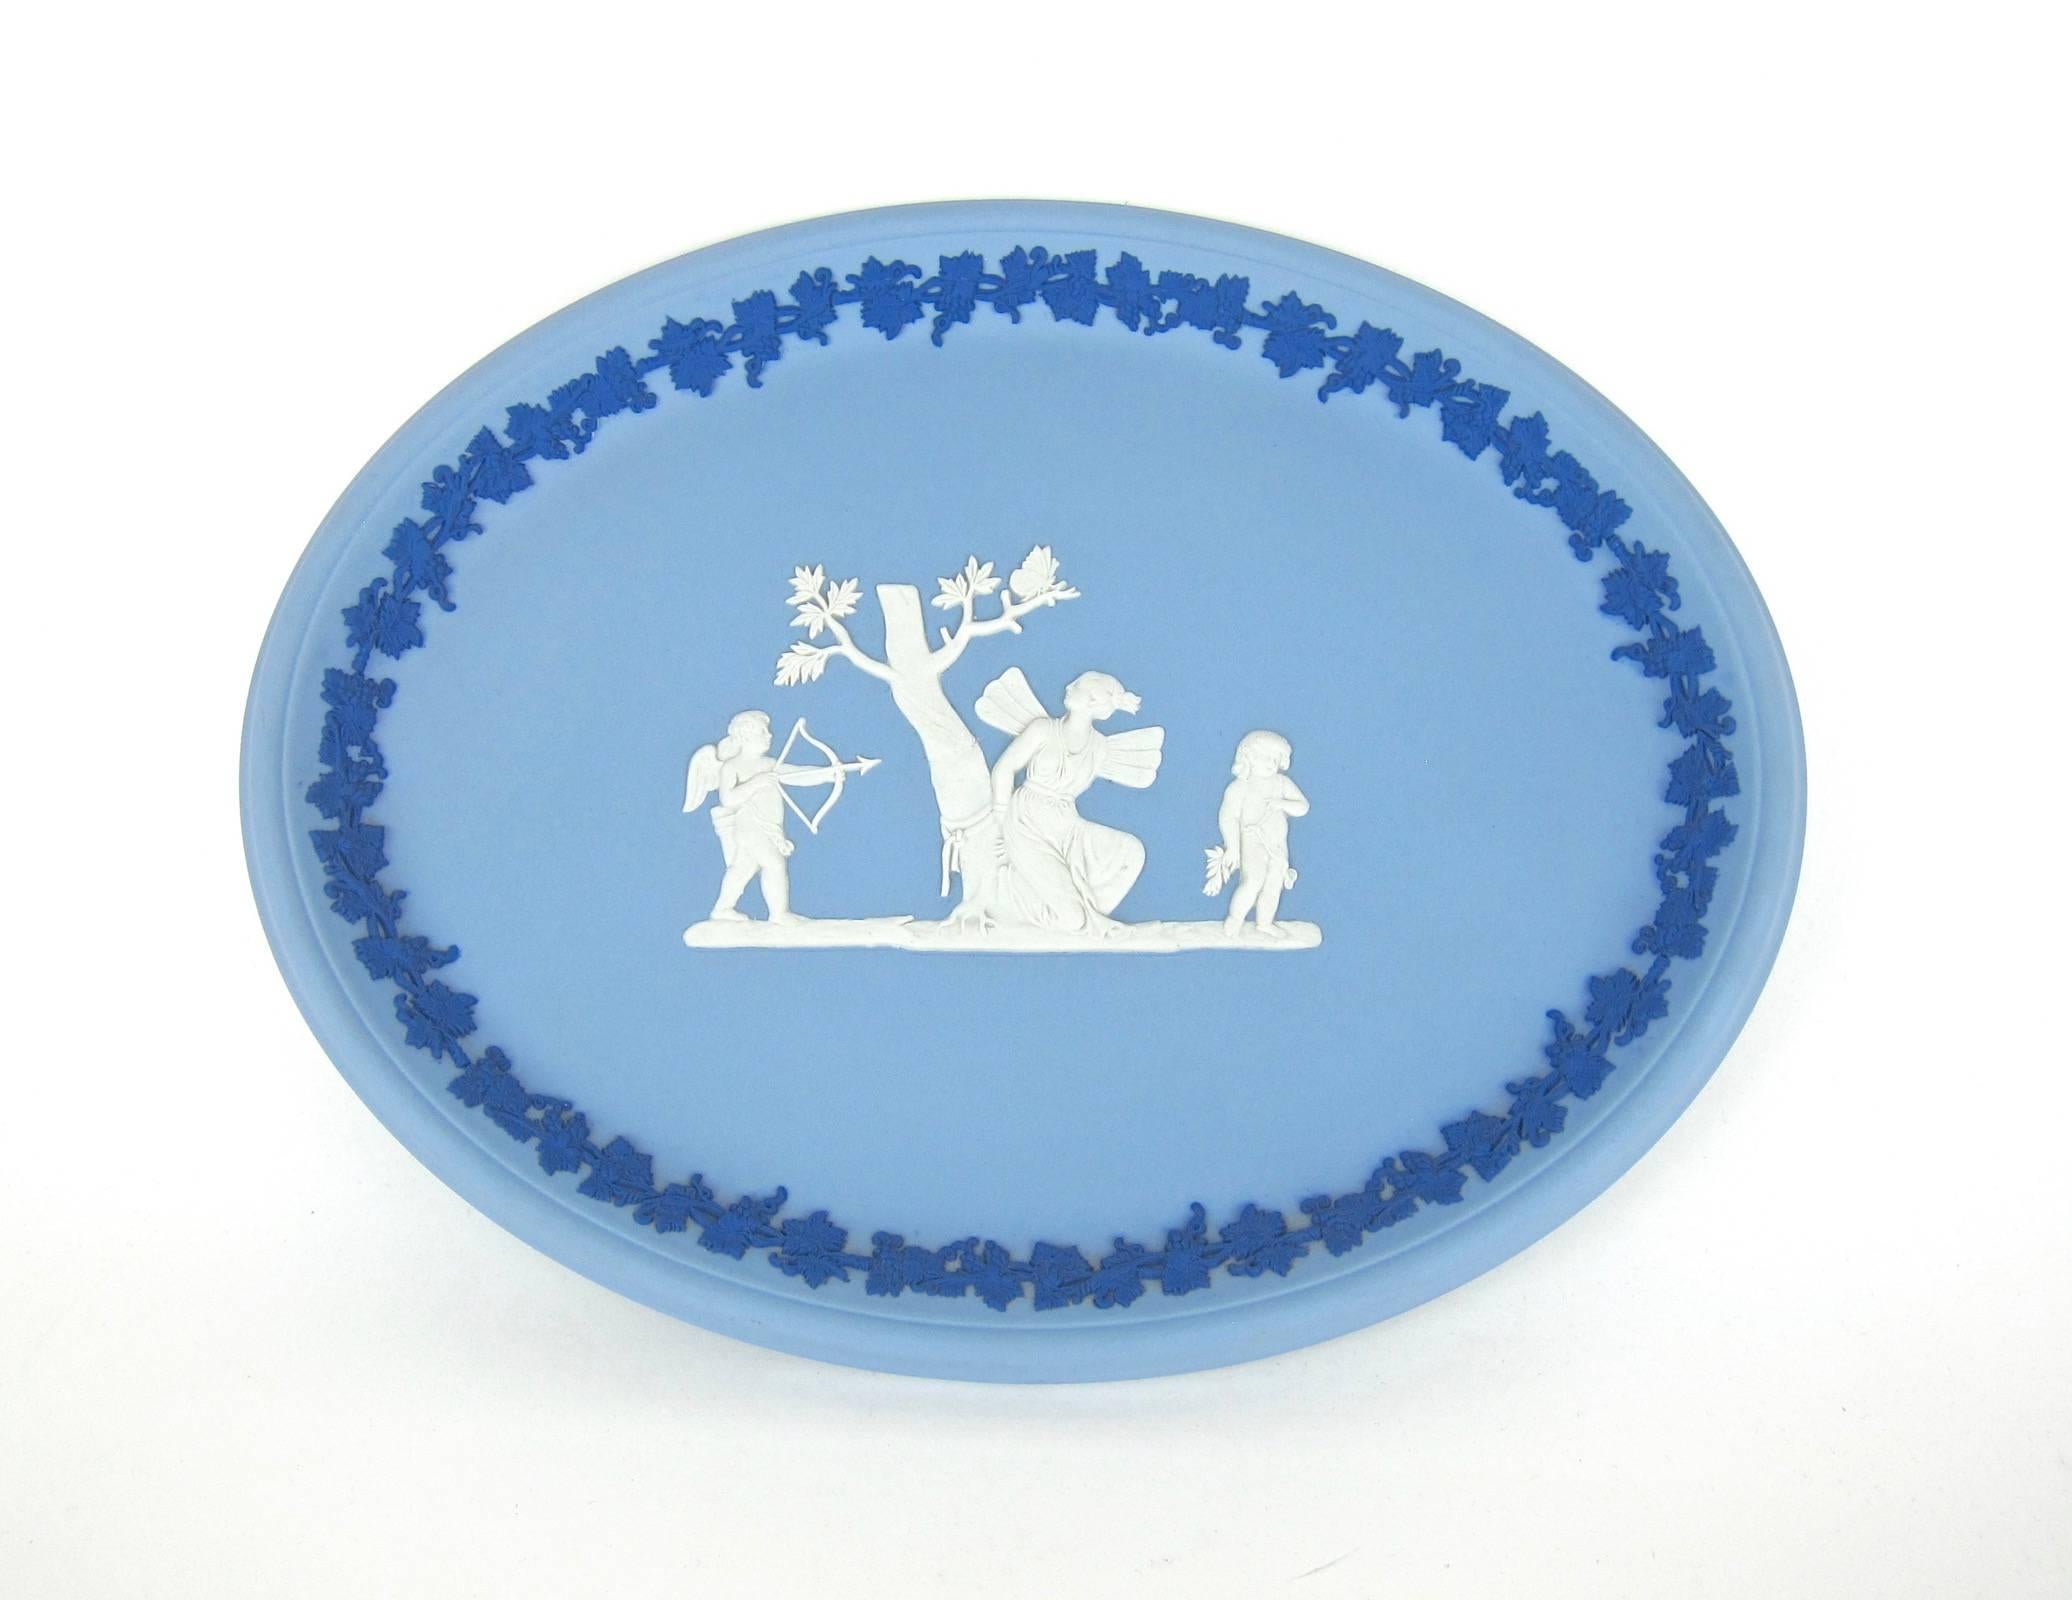 An English Wedgwood oval tray in solid tri-color Jasperware designed to decorate a tabletop, vanity, or for display on a wall. The pale blue body is decorated with a bas-relief scene depicting Psyche bound alongside Cupid drawing his bow. A